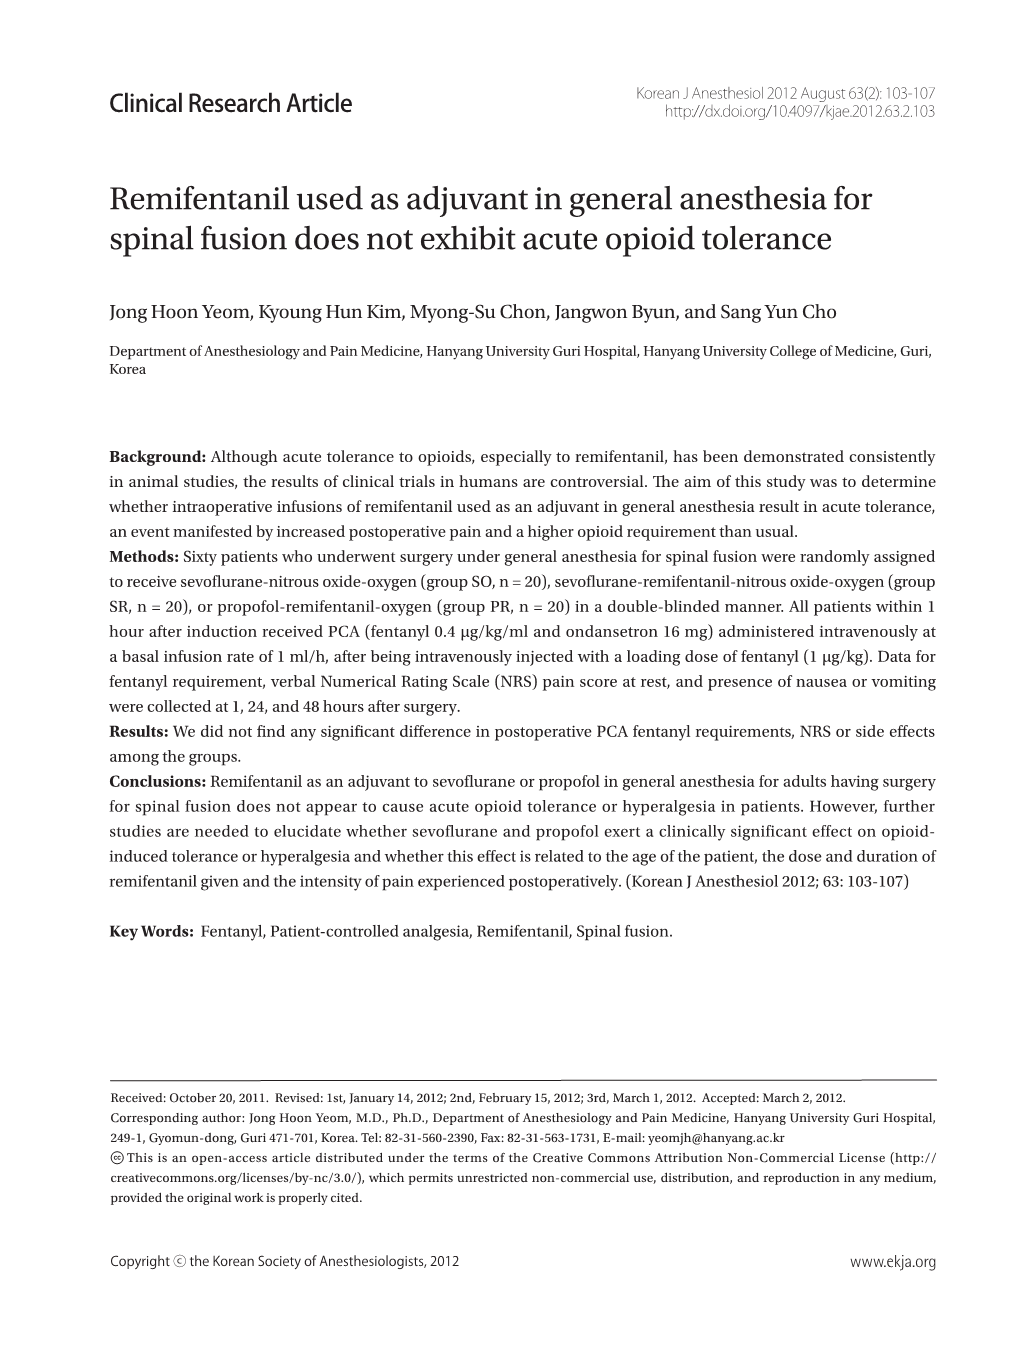 Remifentanil Used As Adjuvant in General Anesthesia for Spinal Fusion Does Not Exhibit Acute Opioid Tolerance